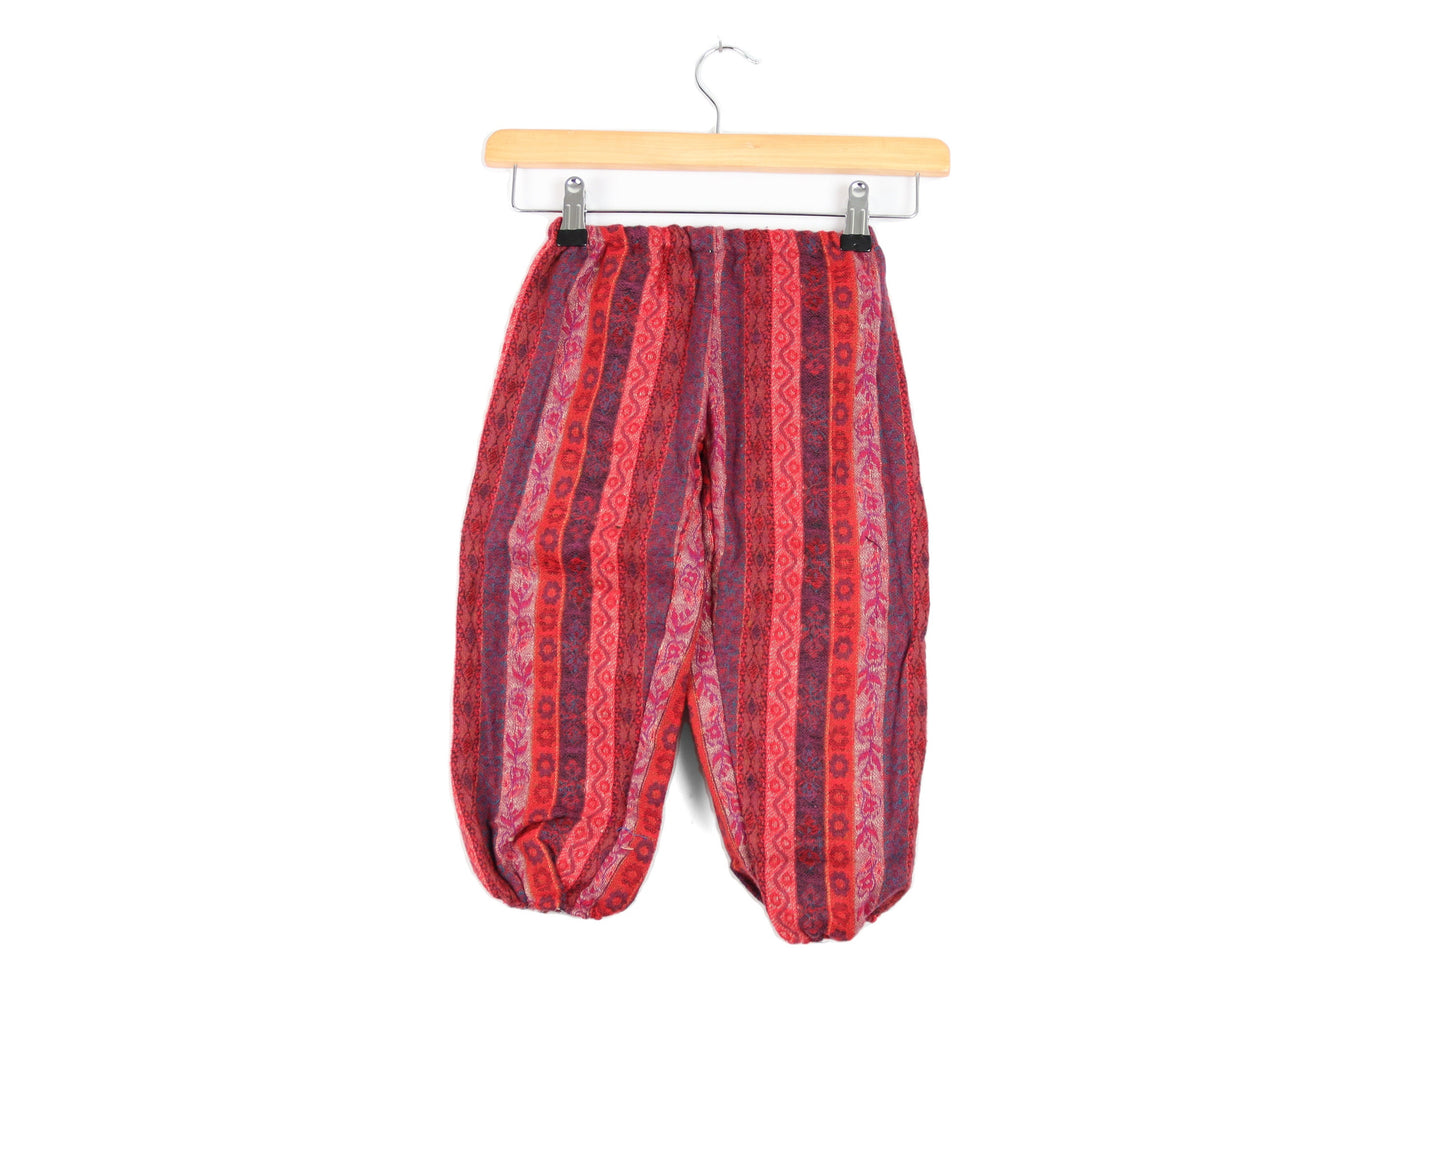 Children's Fleece Trousers - Pink and Purple Paisley Stripe Age 1-2 - Bare Canvas